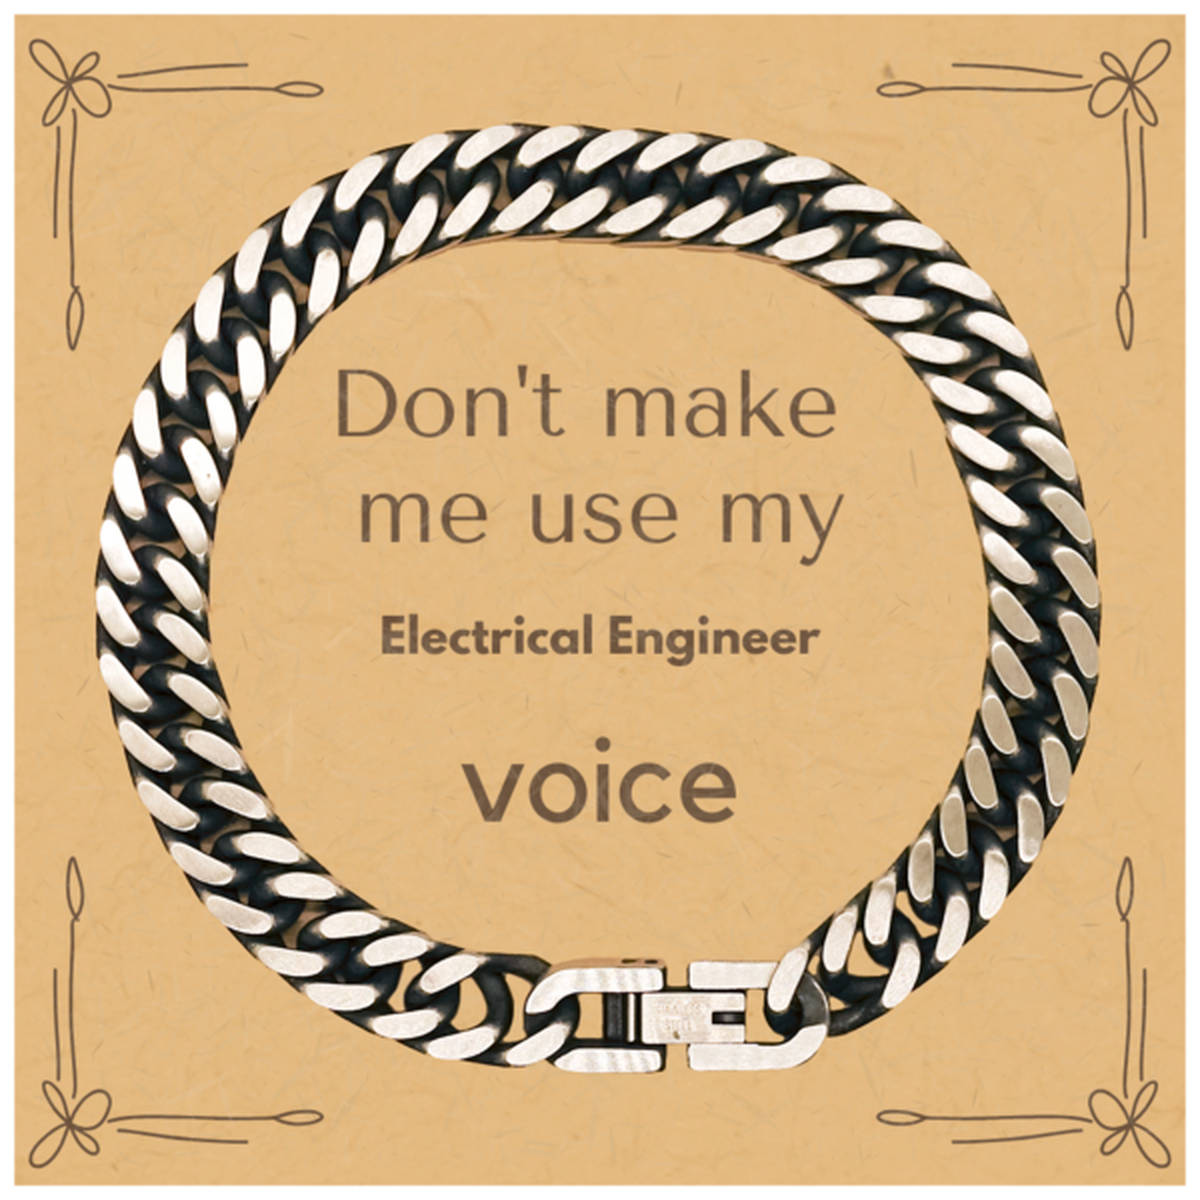 Don't make me use my Electrical Engineer voice, Sarcasm Electrical Engineer Card Gifts, Christmas Electrical Engineer Cuban Link Chain Bracelet Birthday Unique Gifts For Electrical Engineer Coworkers, Men, Women, Colleague, Friends